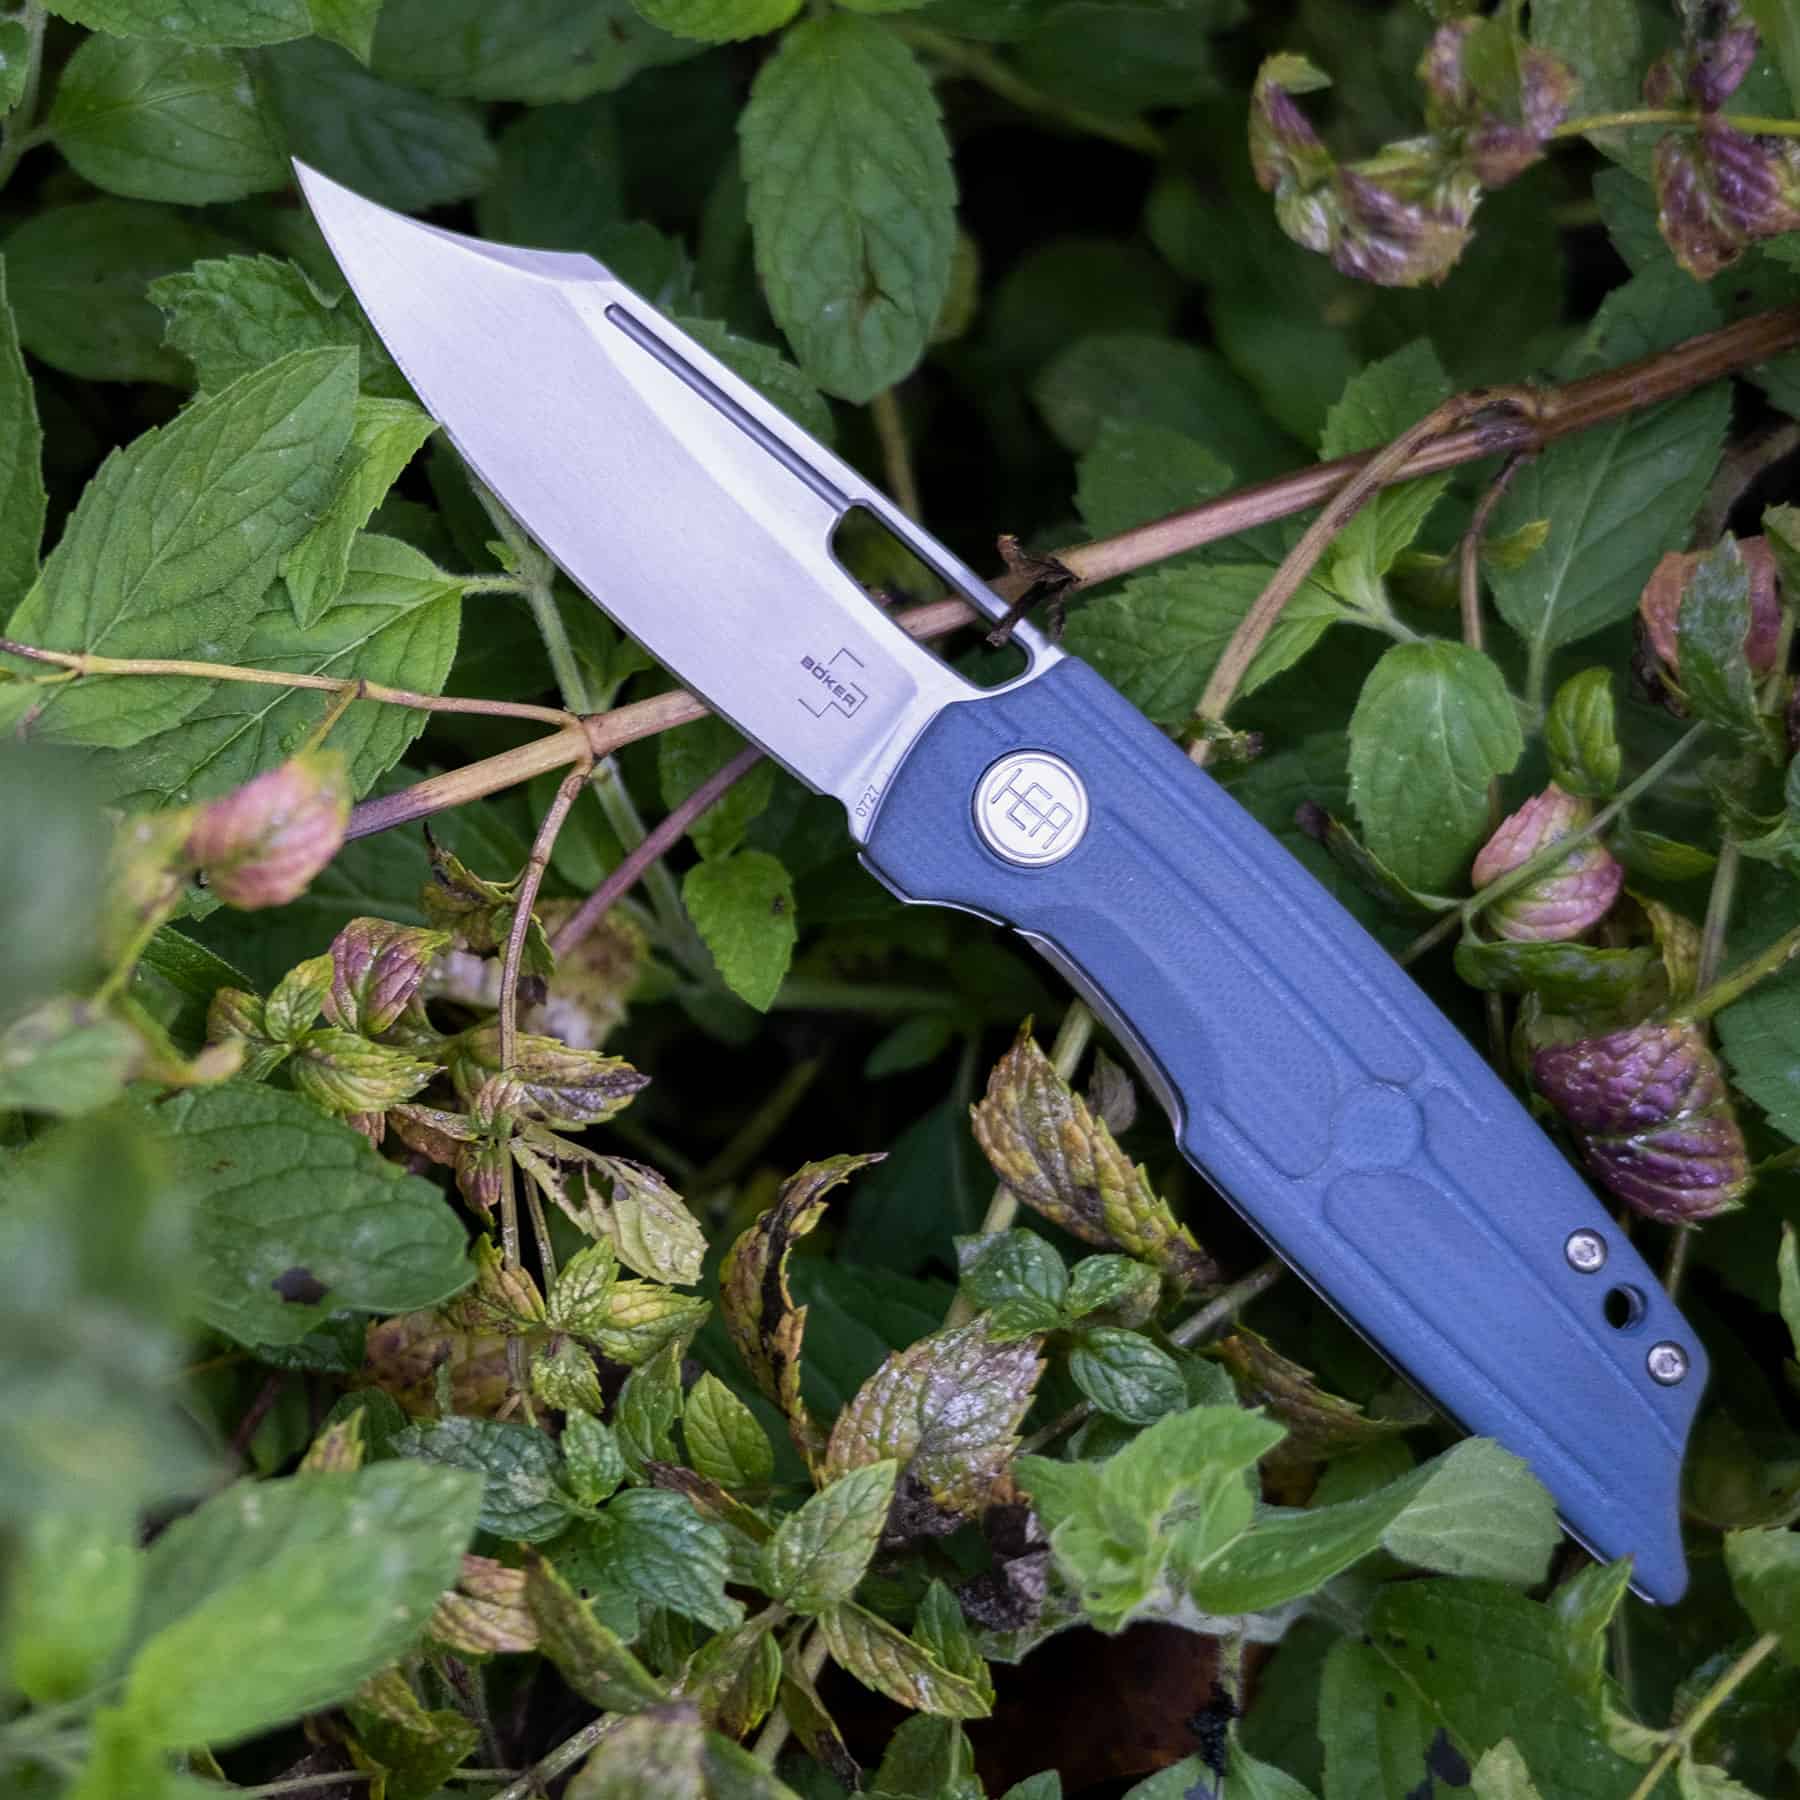 Header image for our in-depth review of the Boker Plus HEA Hunter pocket knife. It is shown here in the open position.